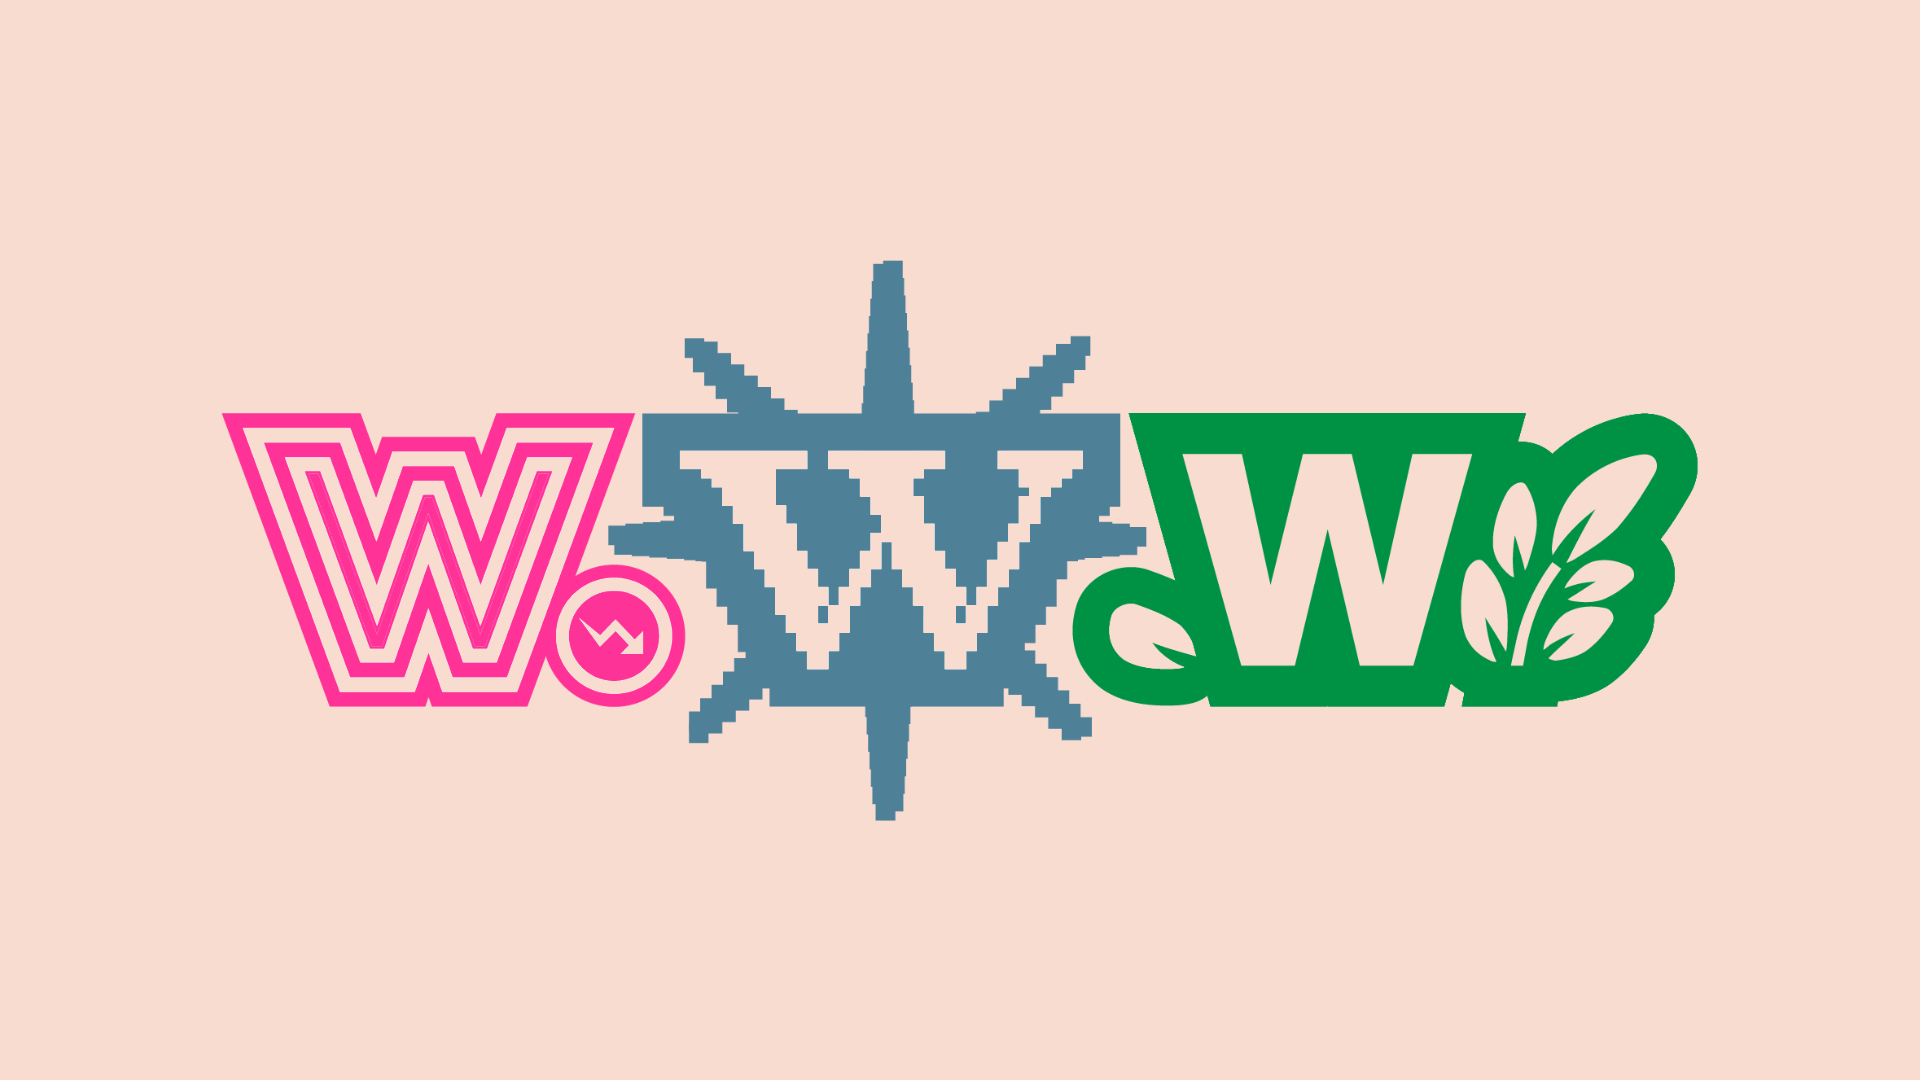 Witchfork, Wandcamp, and Wheatport logos